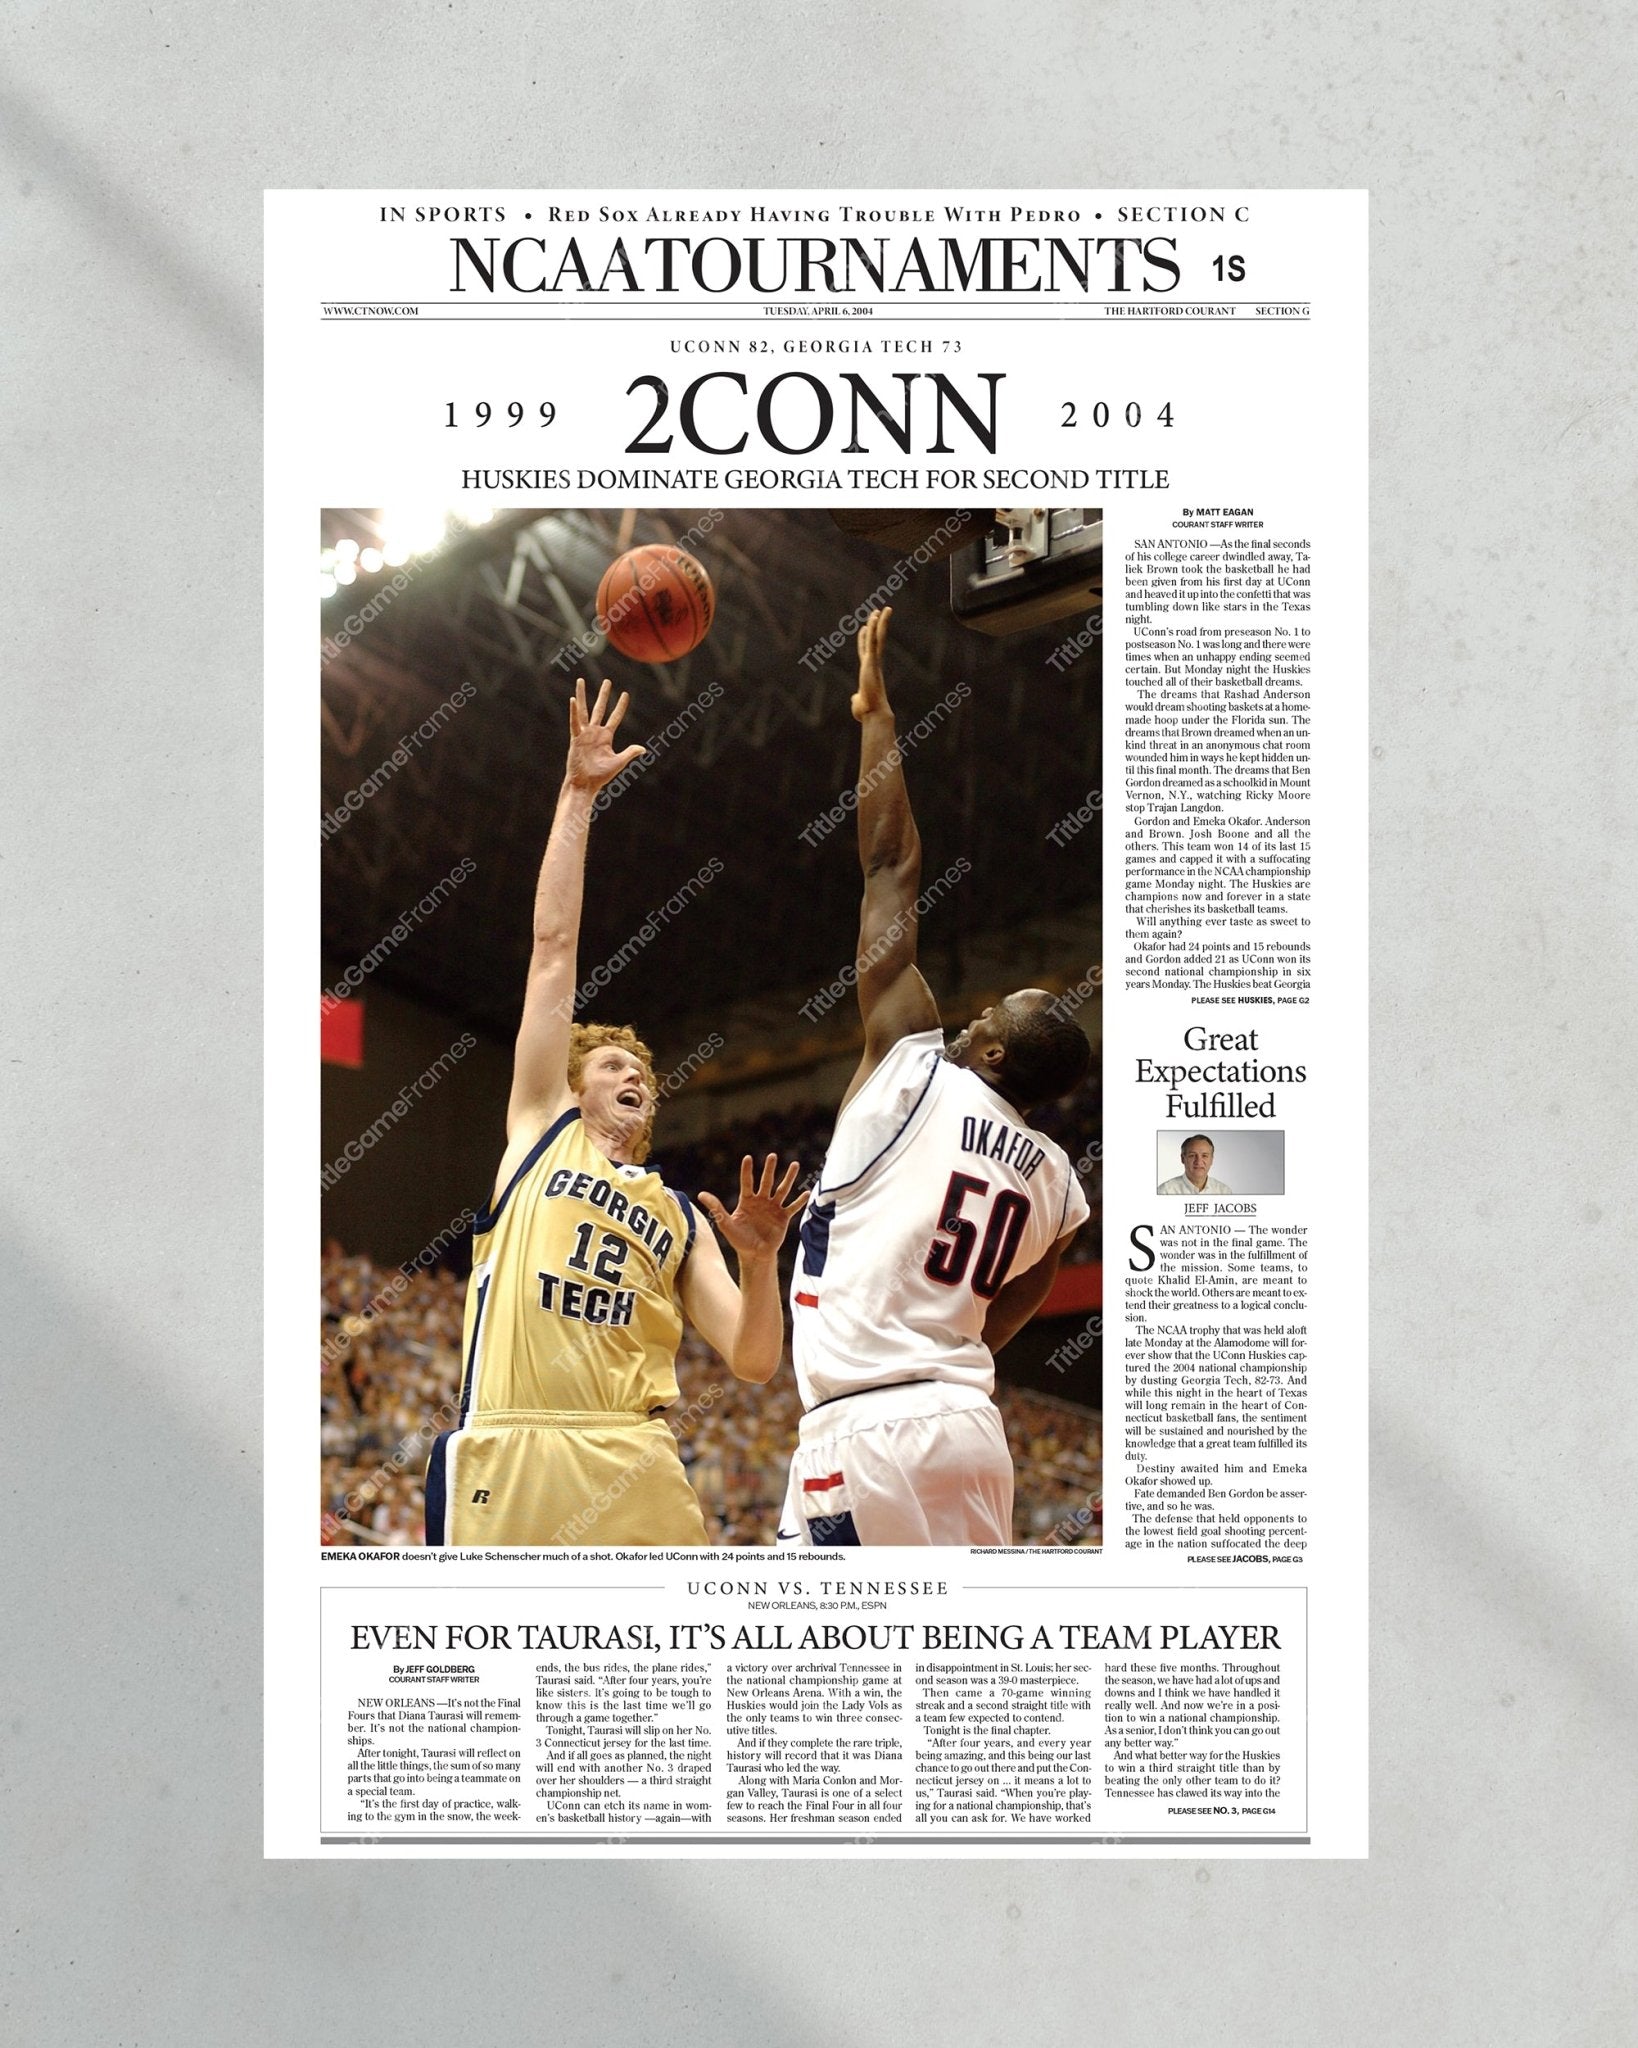 2004 UConn Huskies NCAA College Basketball Champions '2CONN' Framed Front Page Newspaper - Title Game Frames